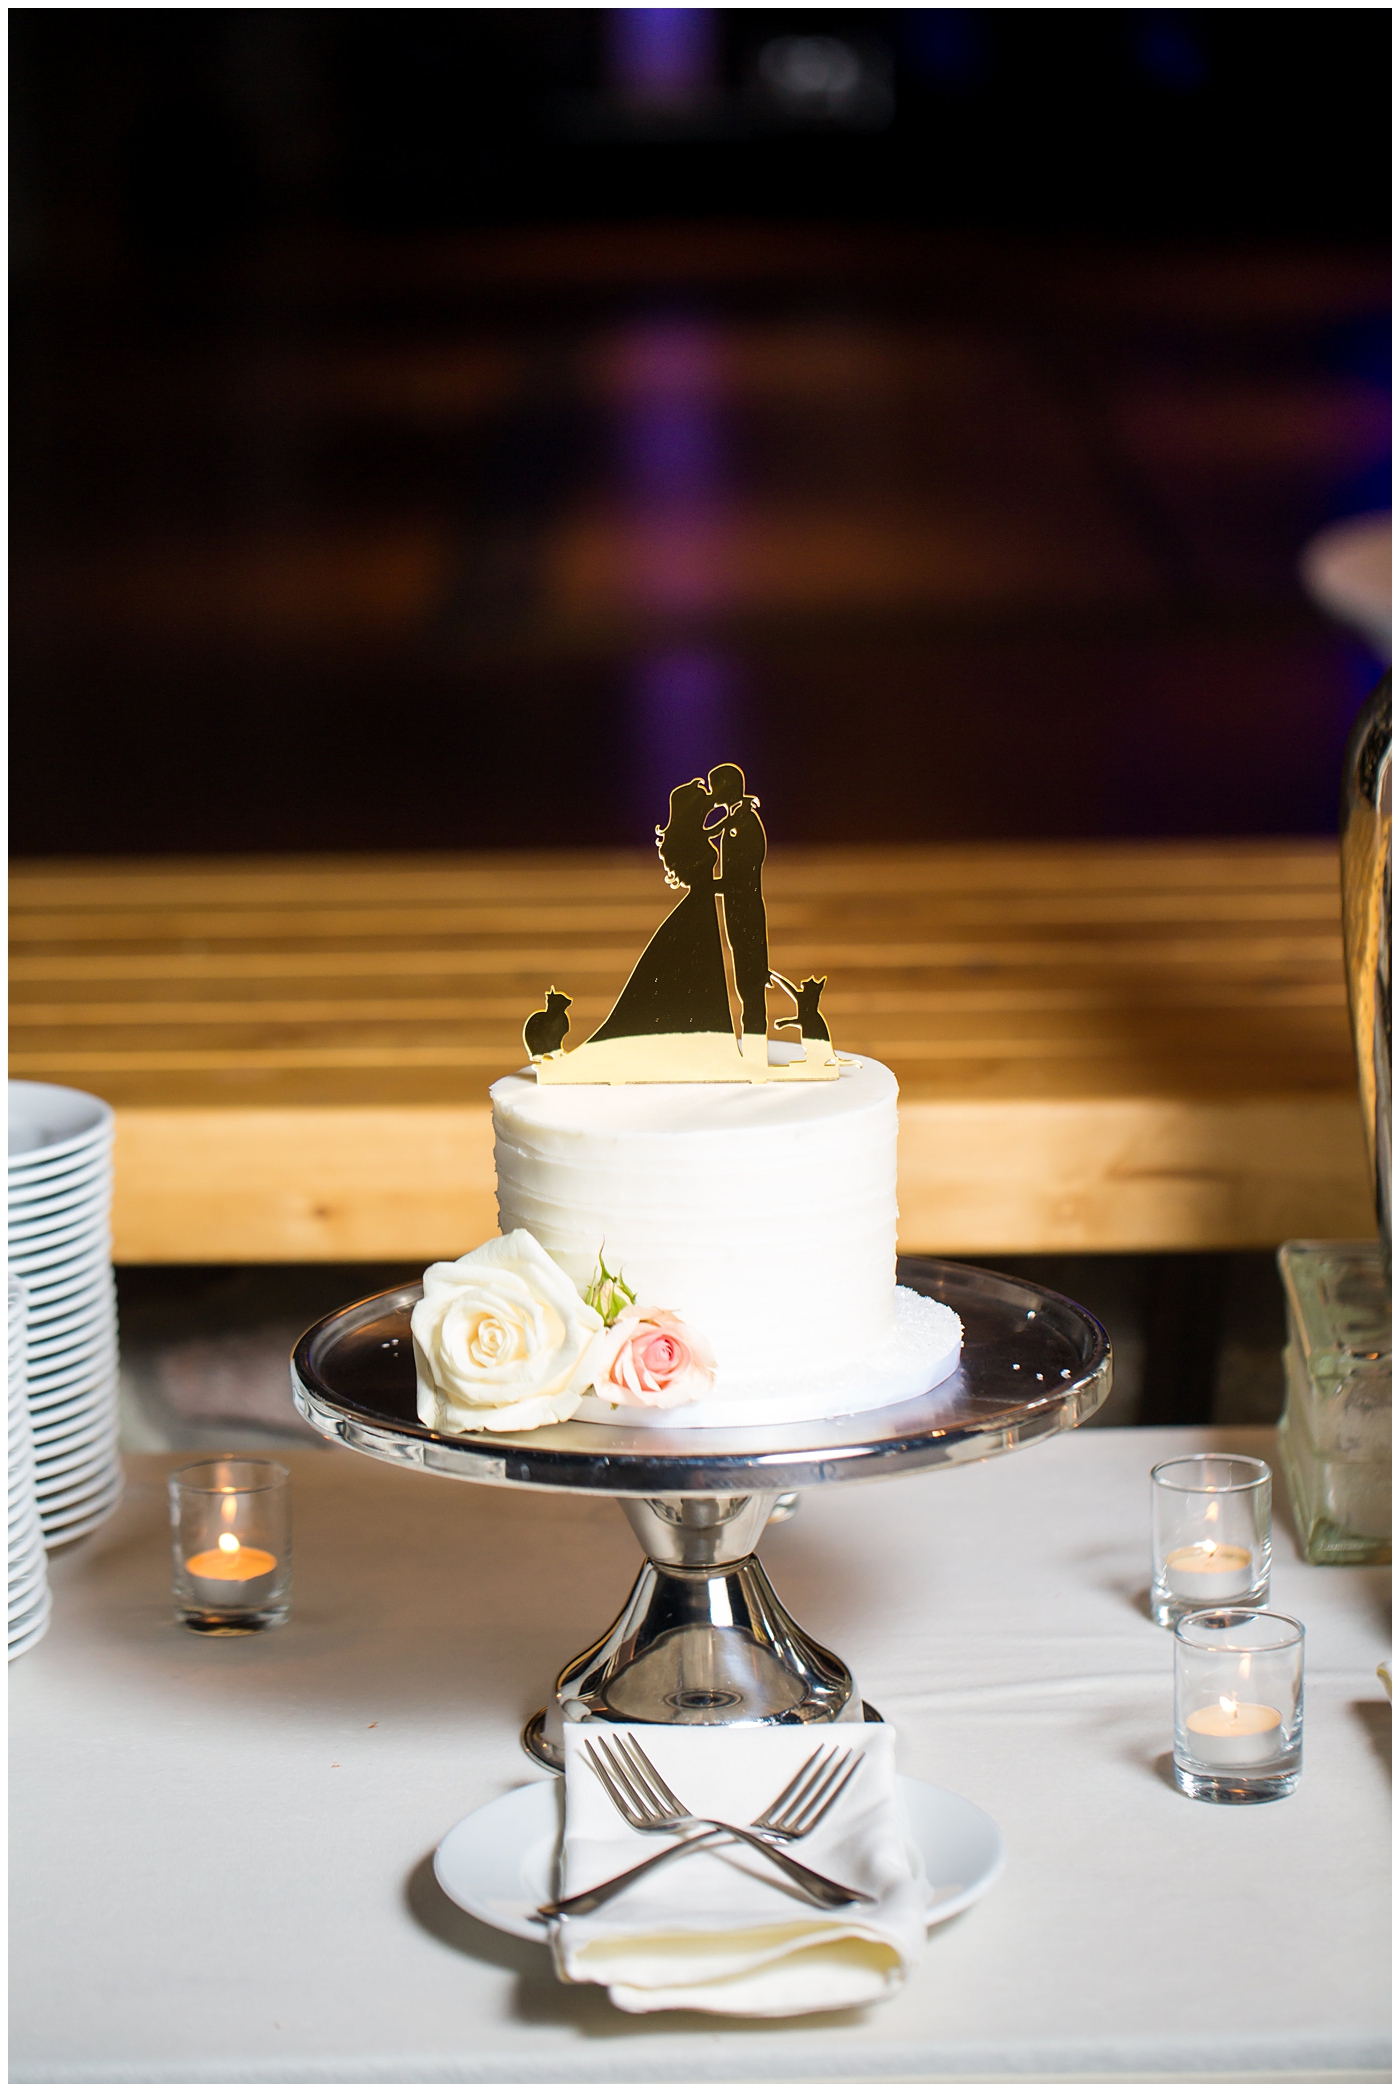 White wedding cake with custom gold cake topper of bride and groom with cats